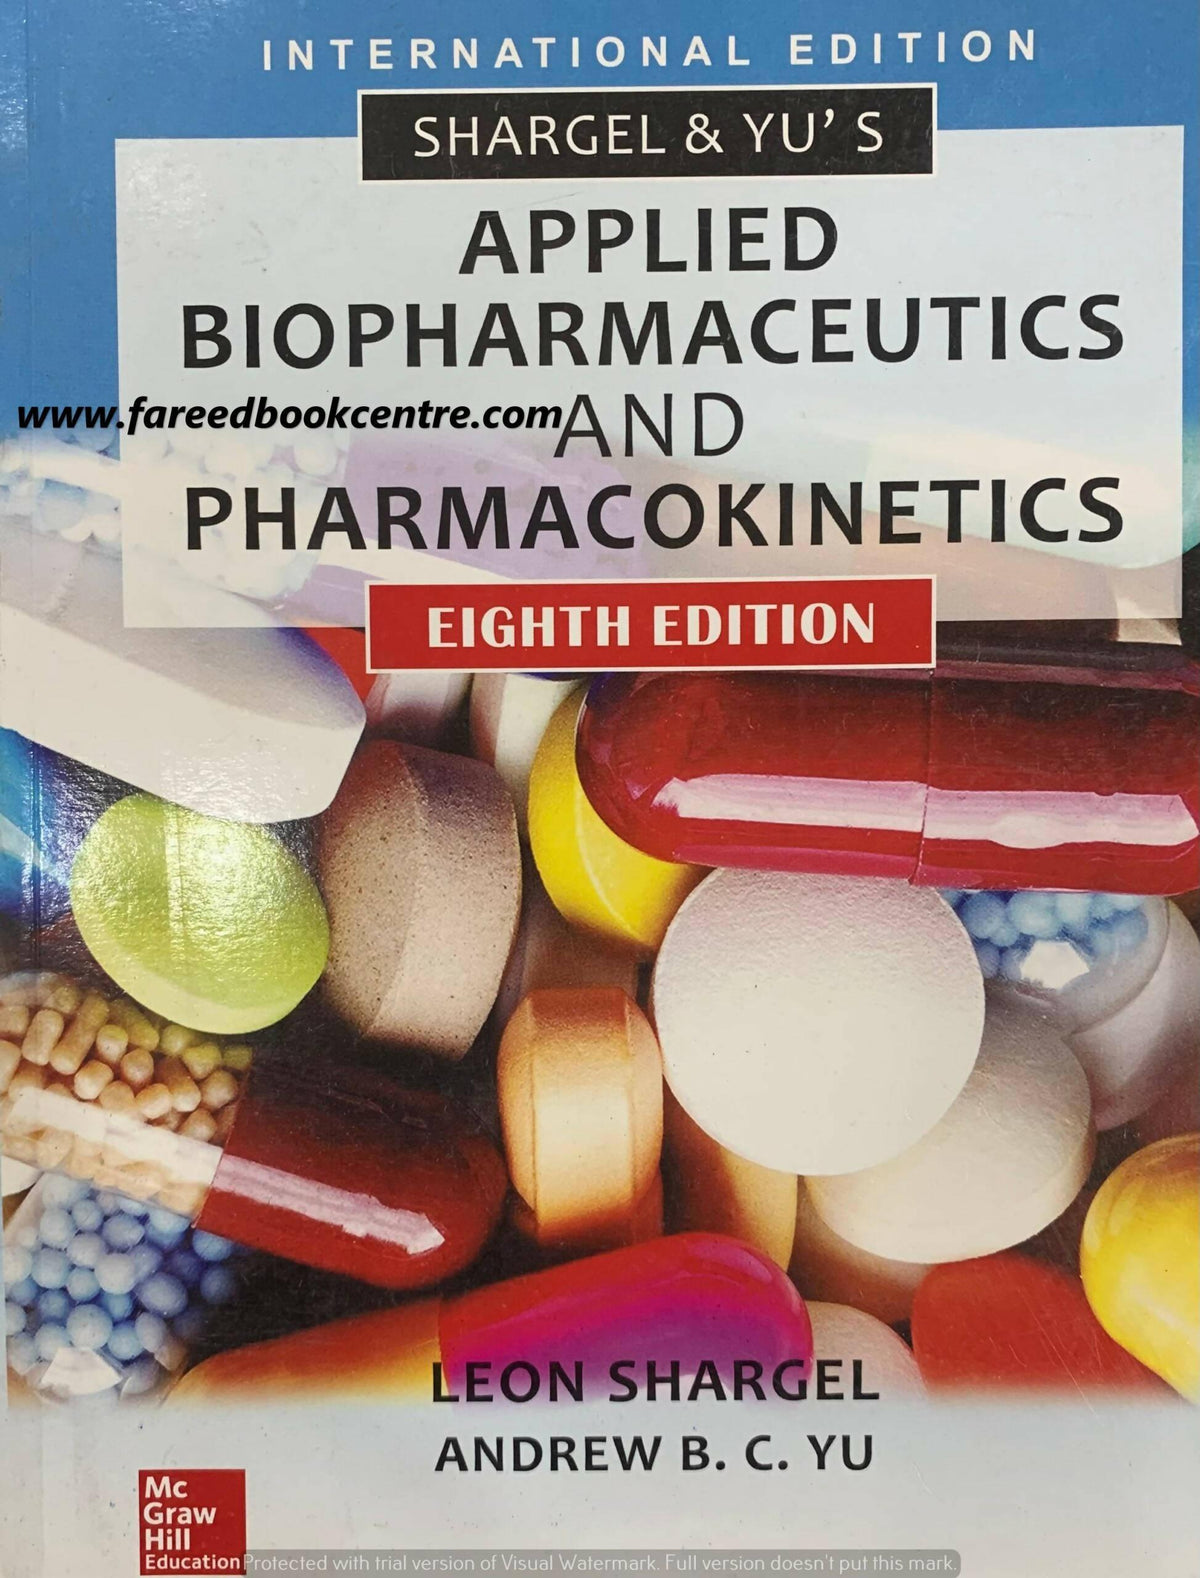 SHARGEL & YU'S Applied Biopharmaceutics & Pharmacokinetics By EIGHTH Edition - ValueBox